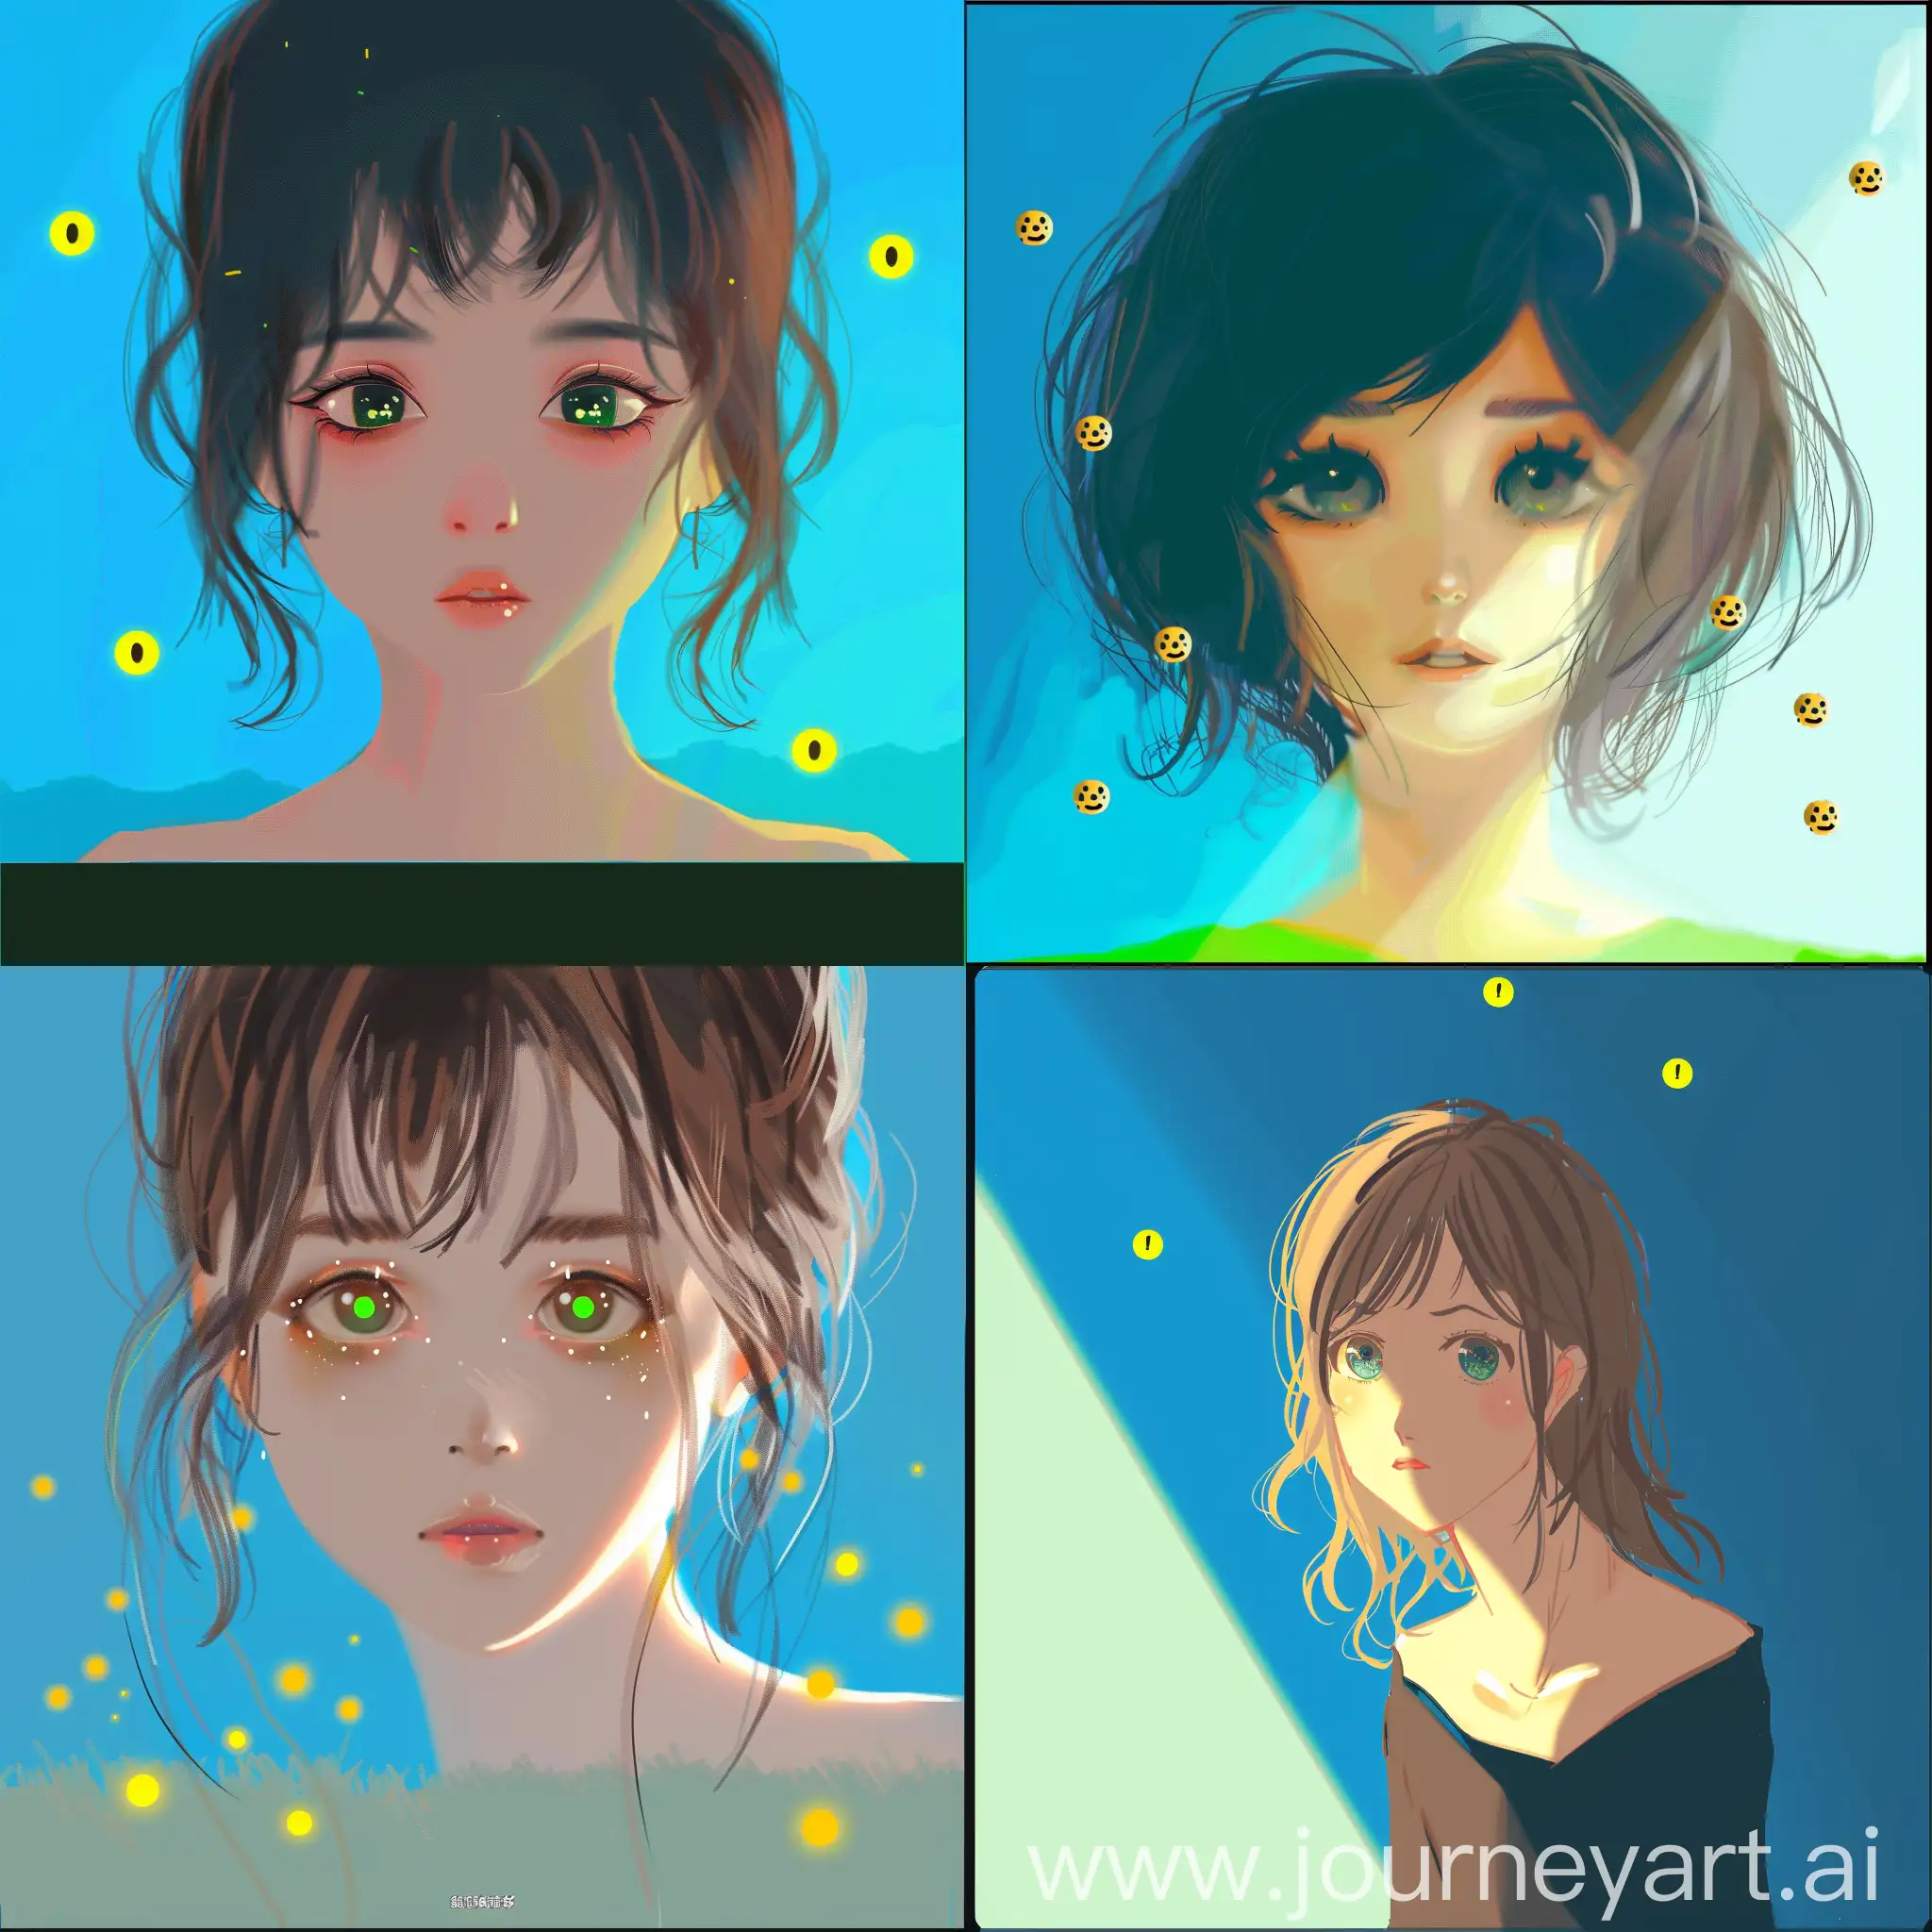 Anime-Style-Pretty-Girl-Portrait-with-Ethereal-Expression